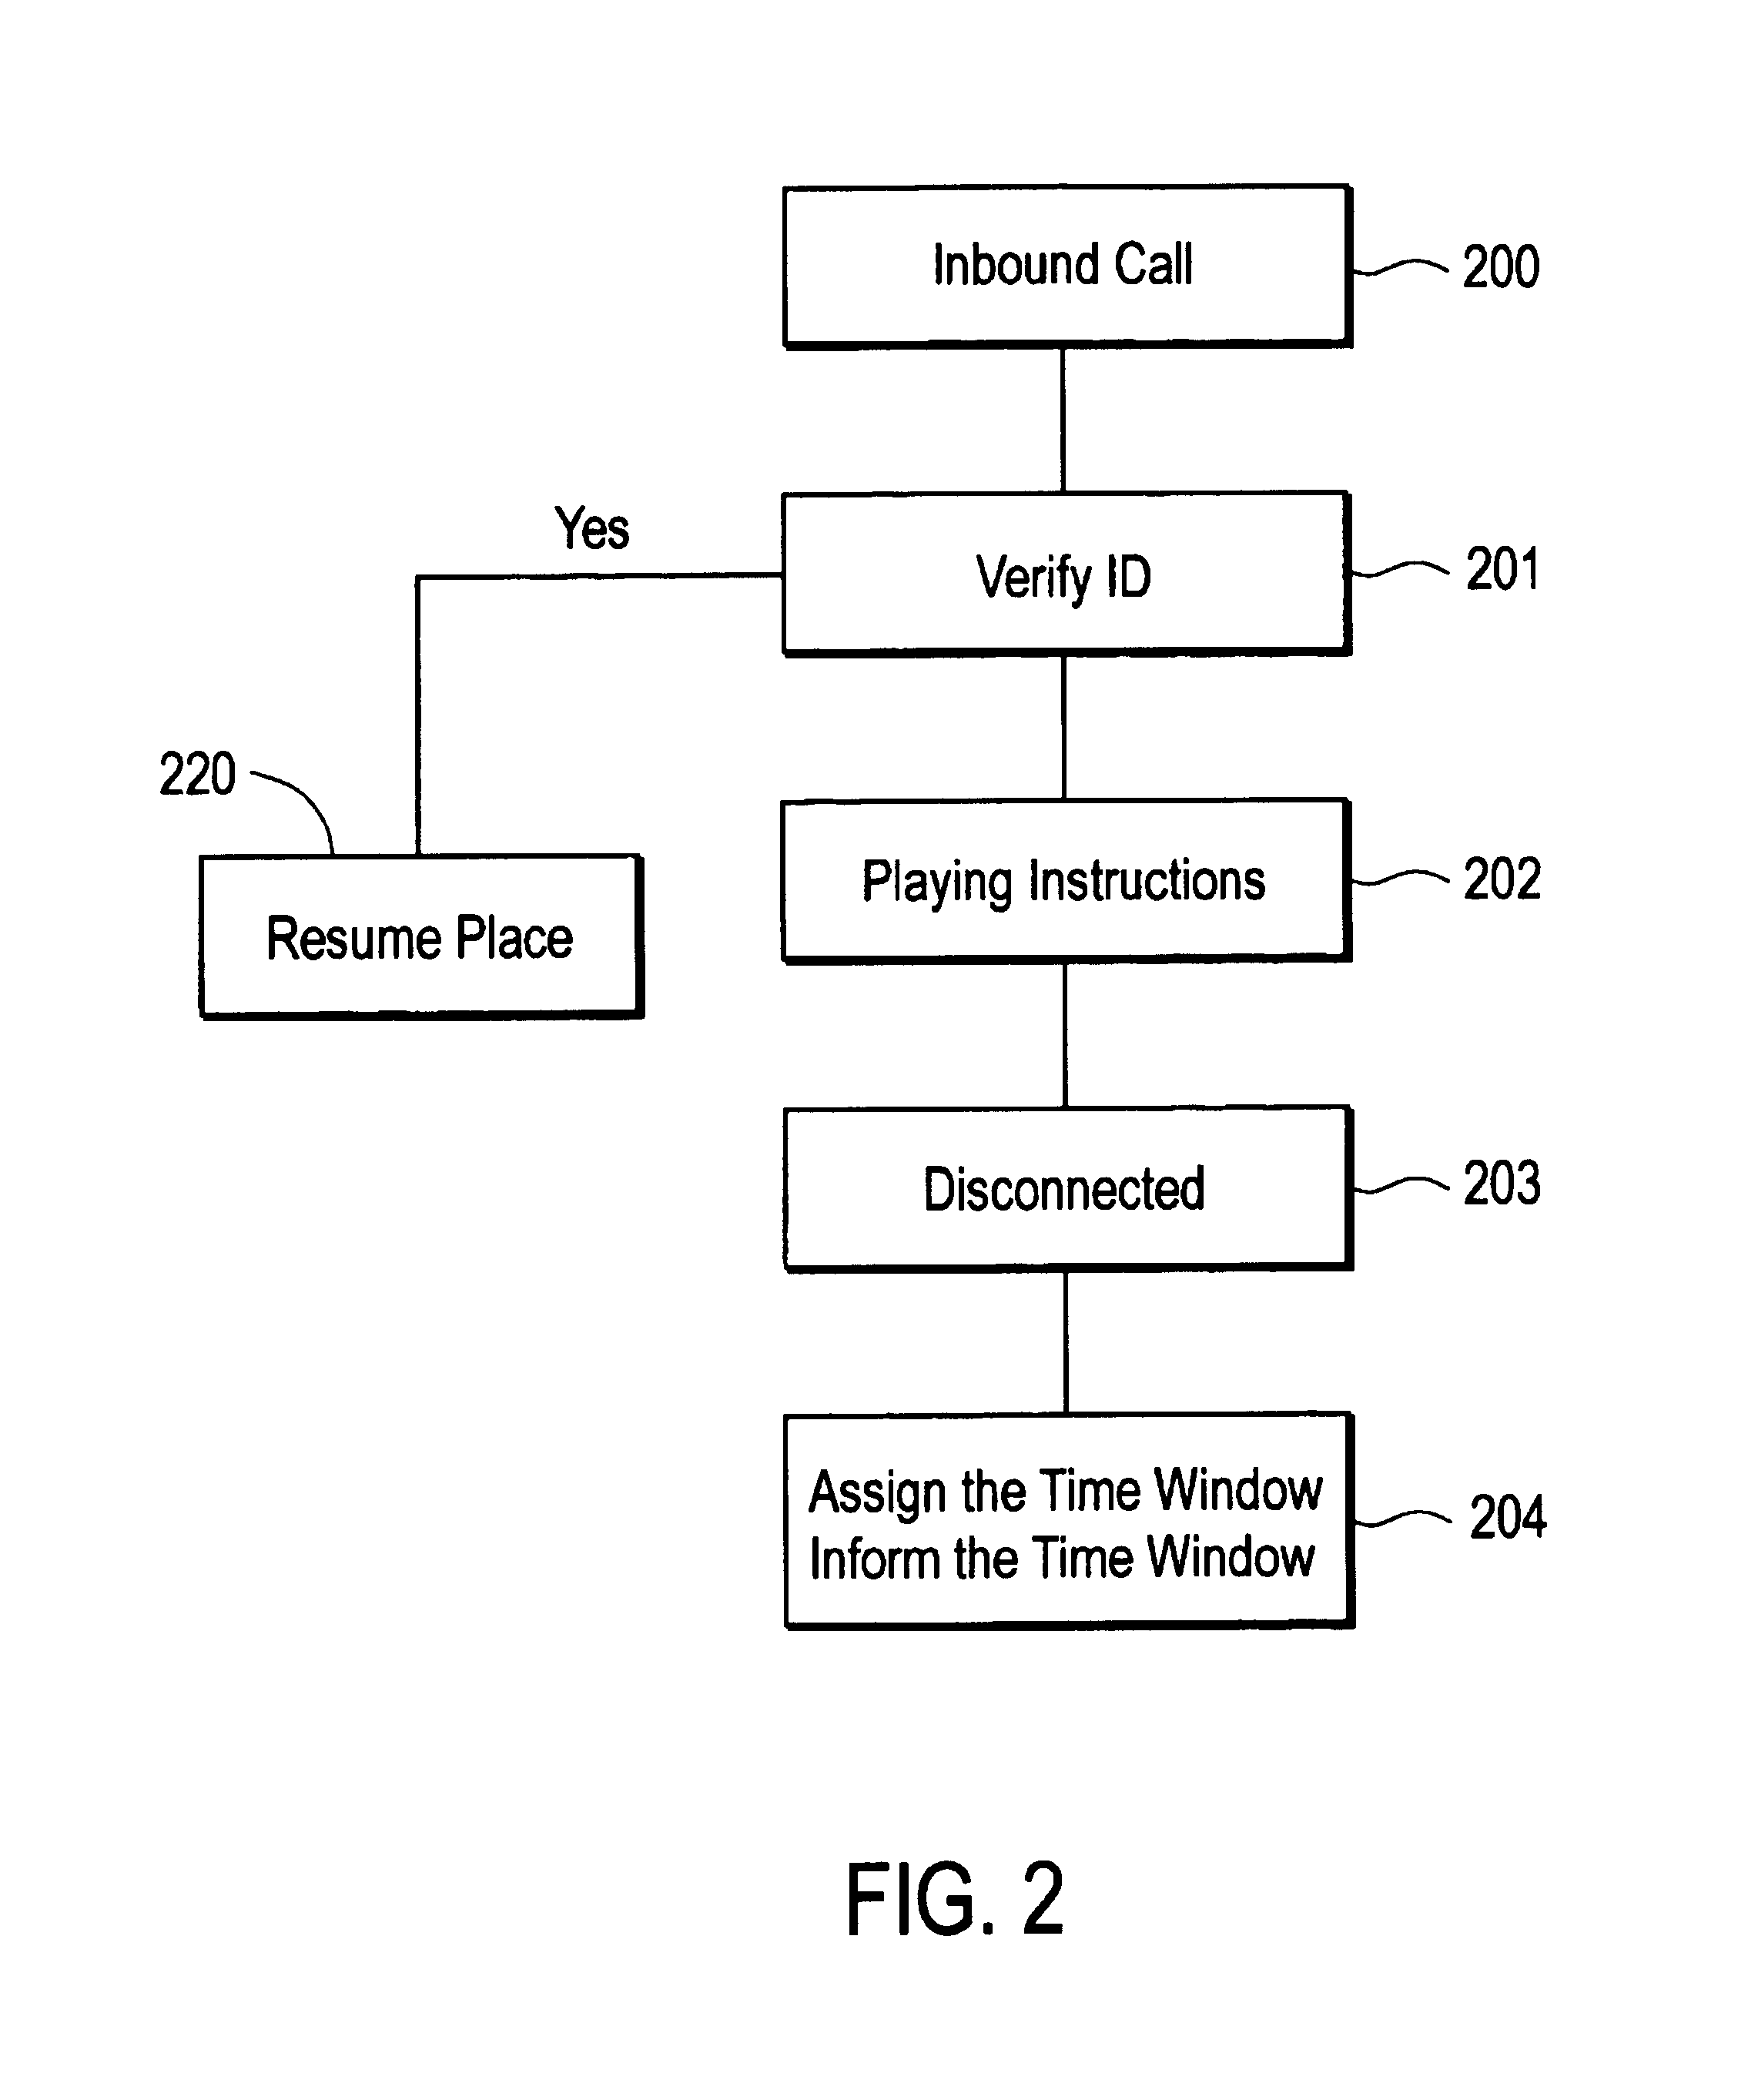 Method of processing an inbound call in a call center